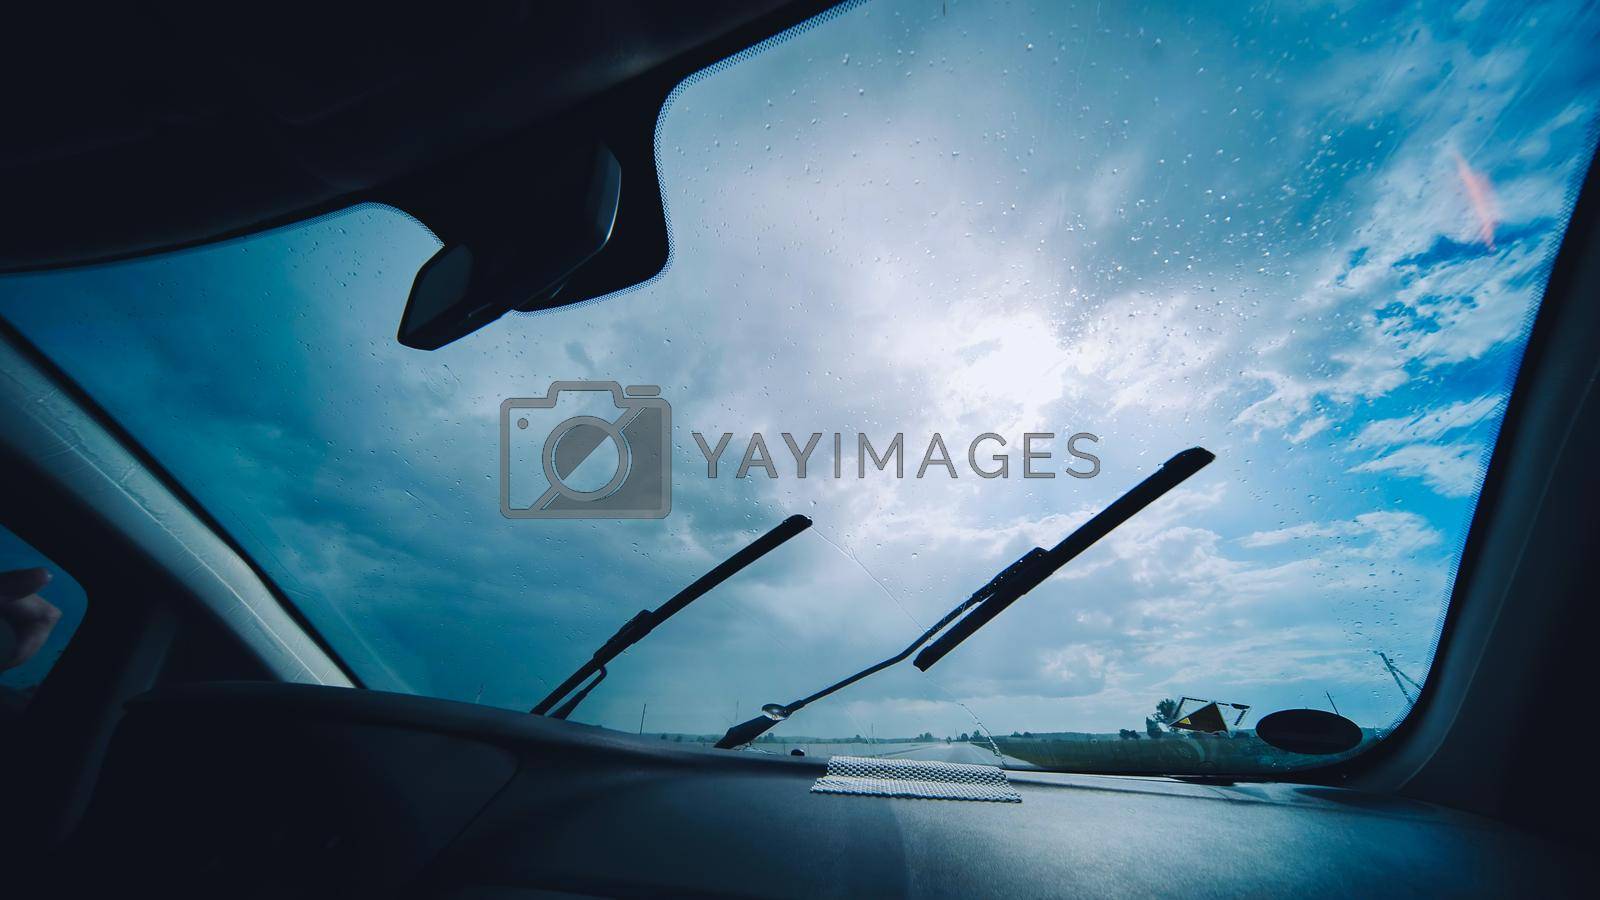 Royalty free image of The work of car brushes in the rain. by DovidPro